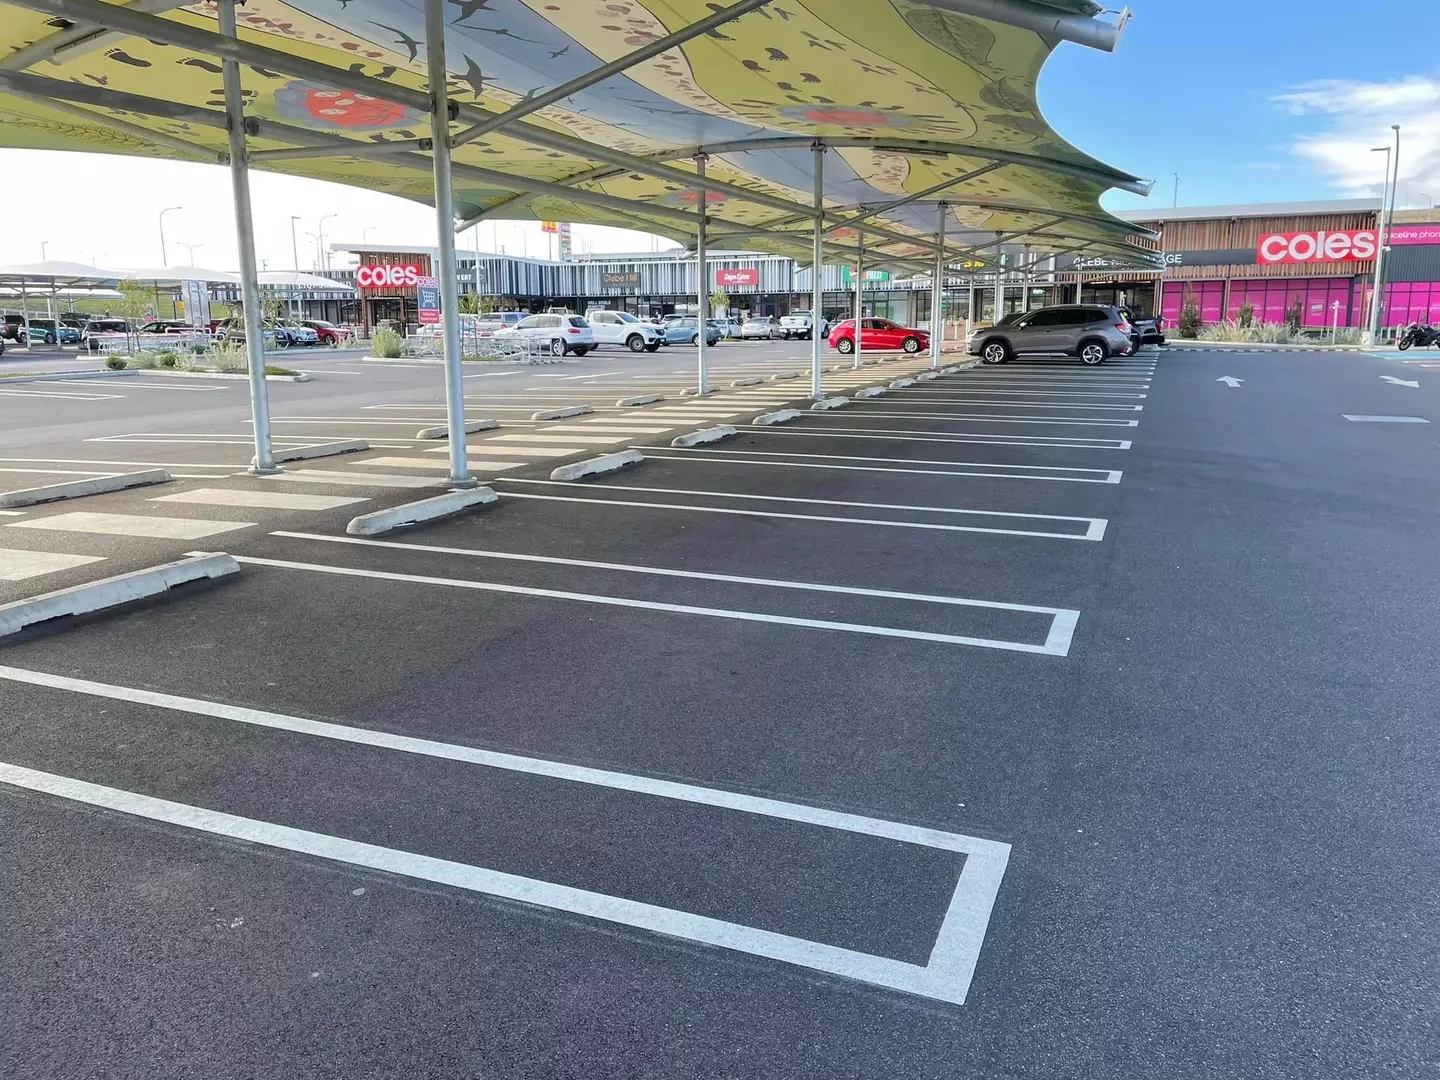 Parking spaces are separated by rectangles instead of white lines.